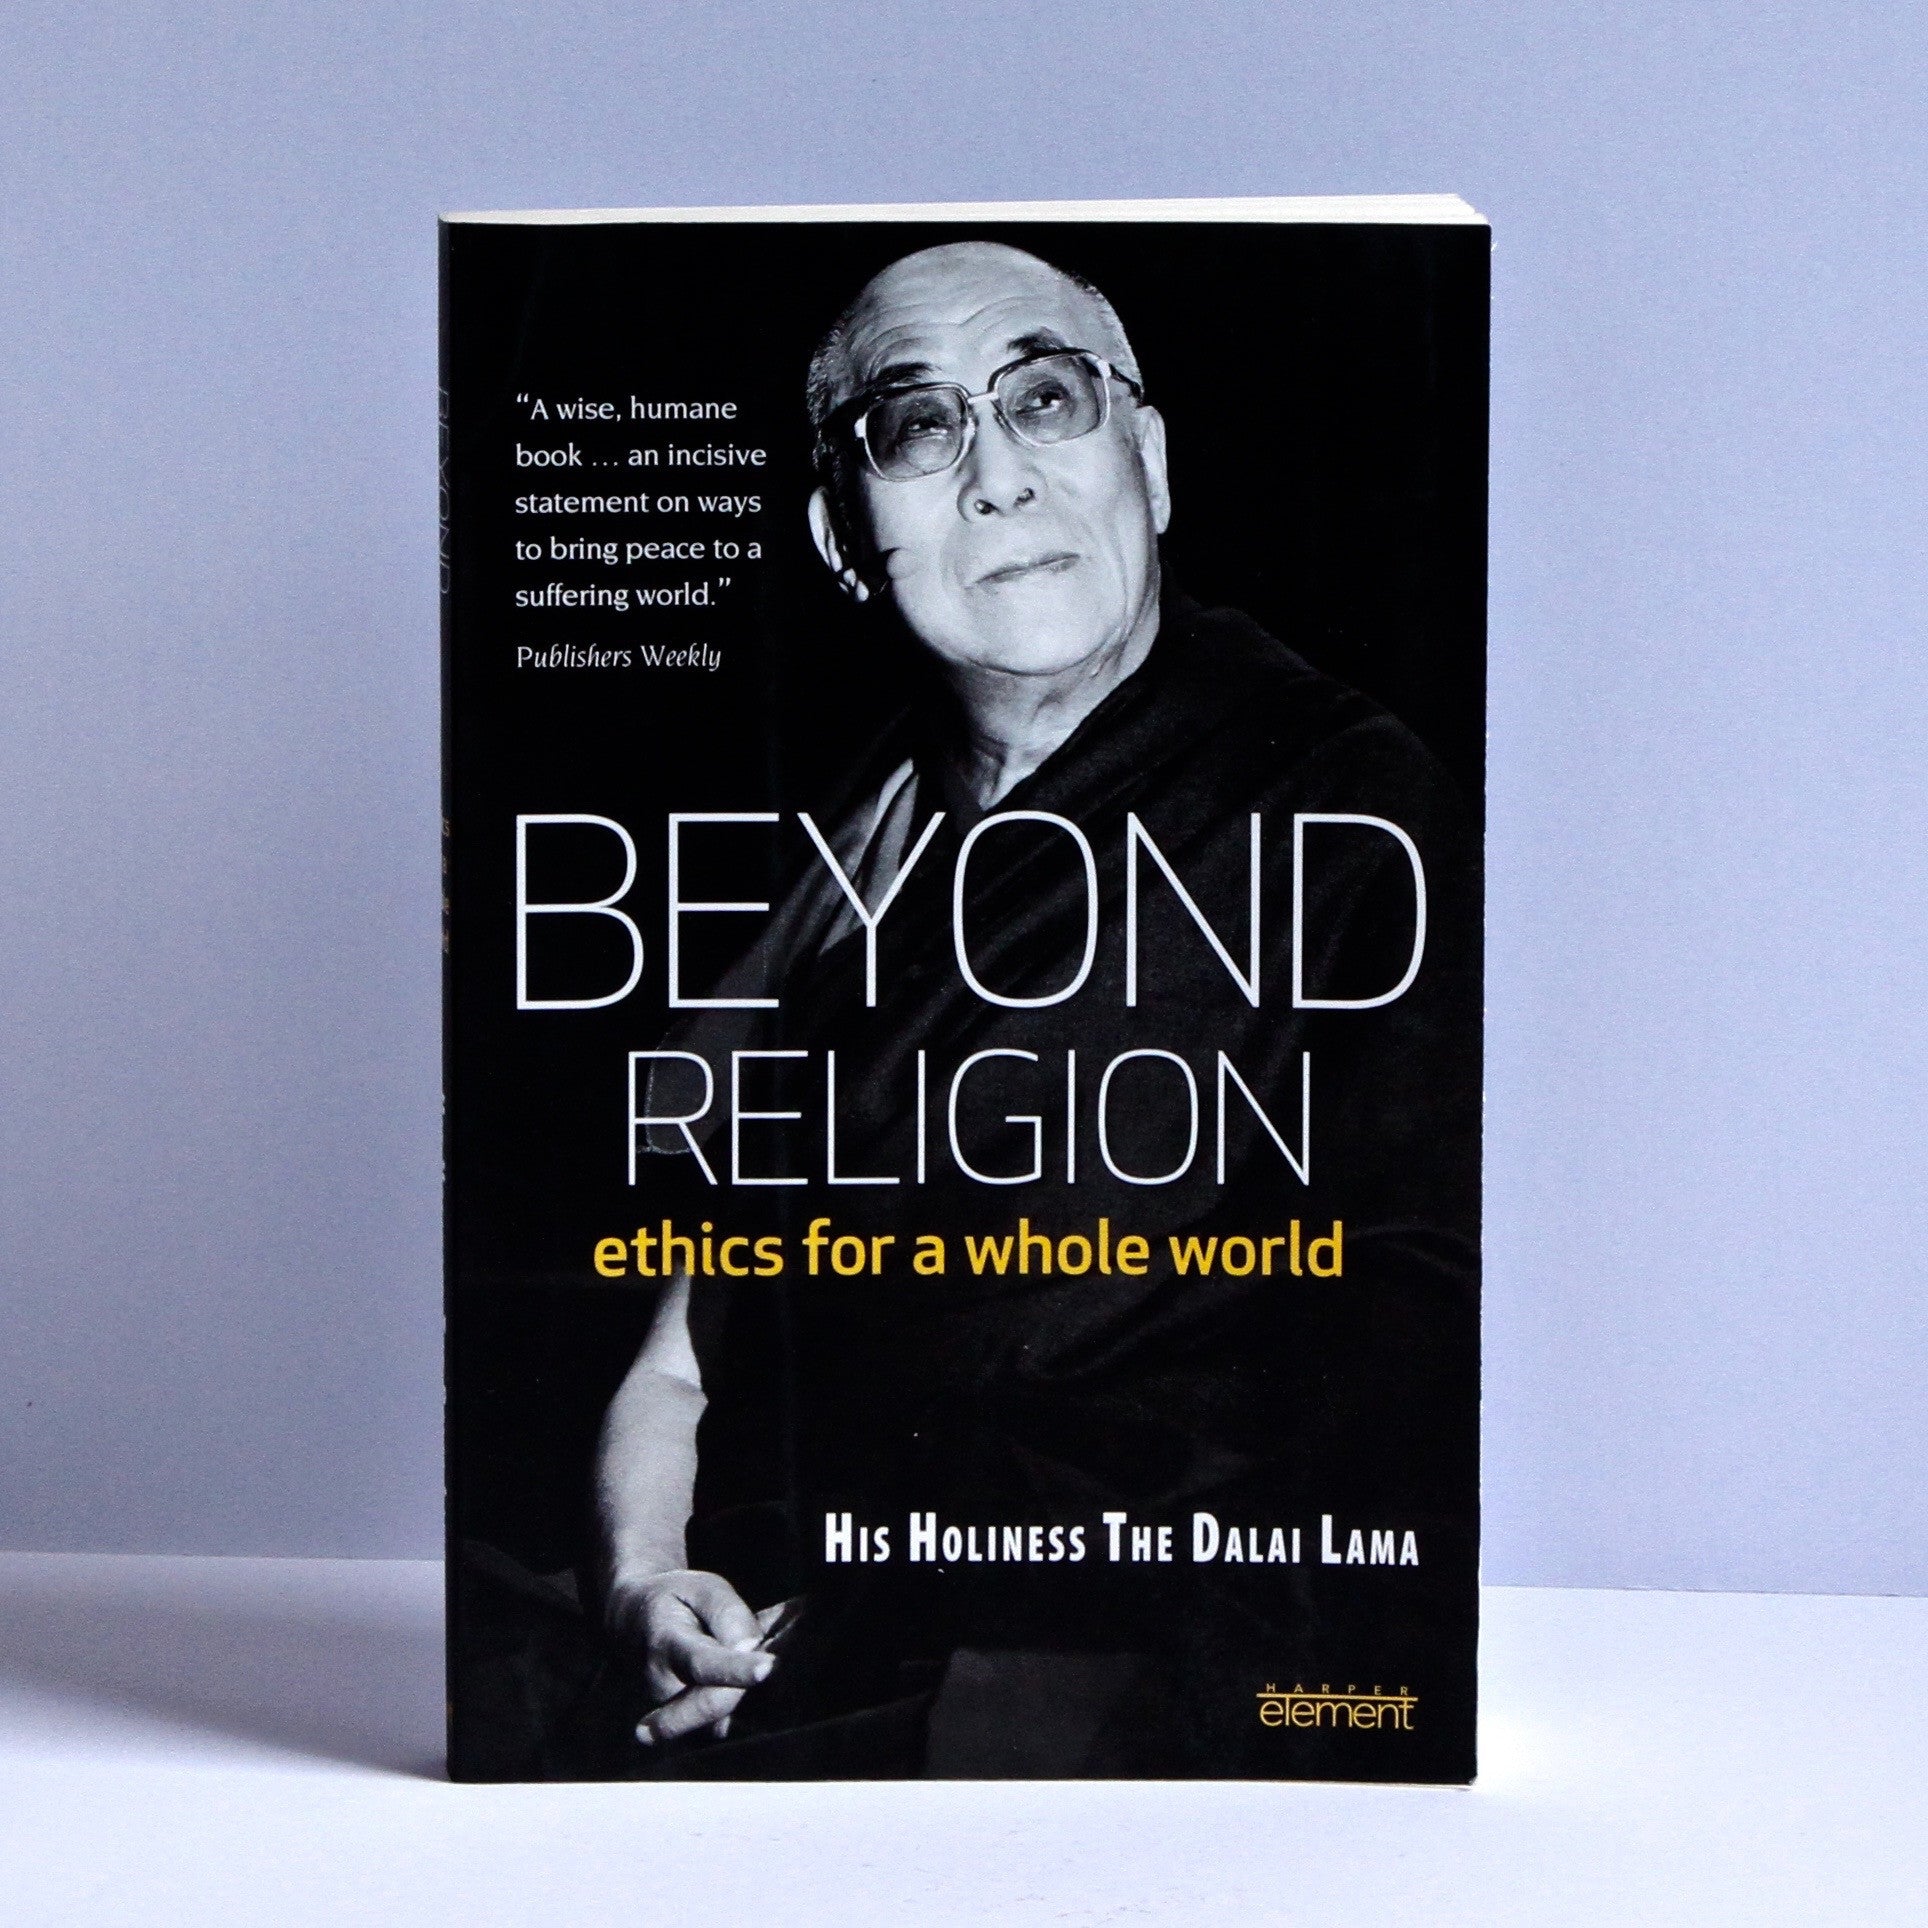 Beyond Religion - Ethics for a Whole World by HH The Dalai Lama